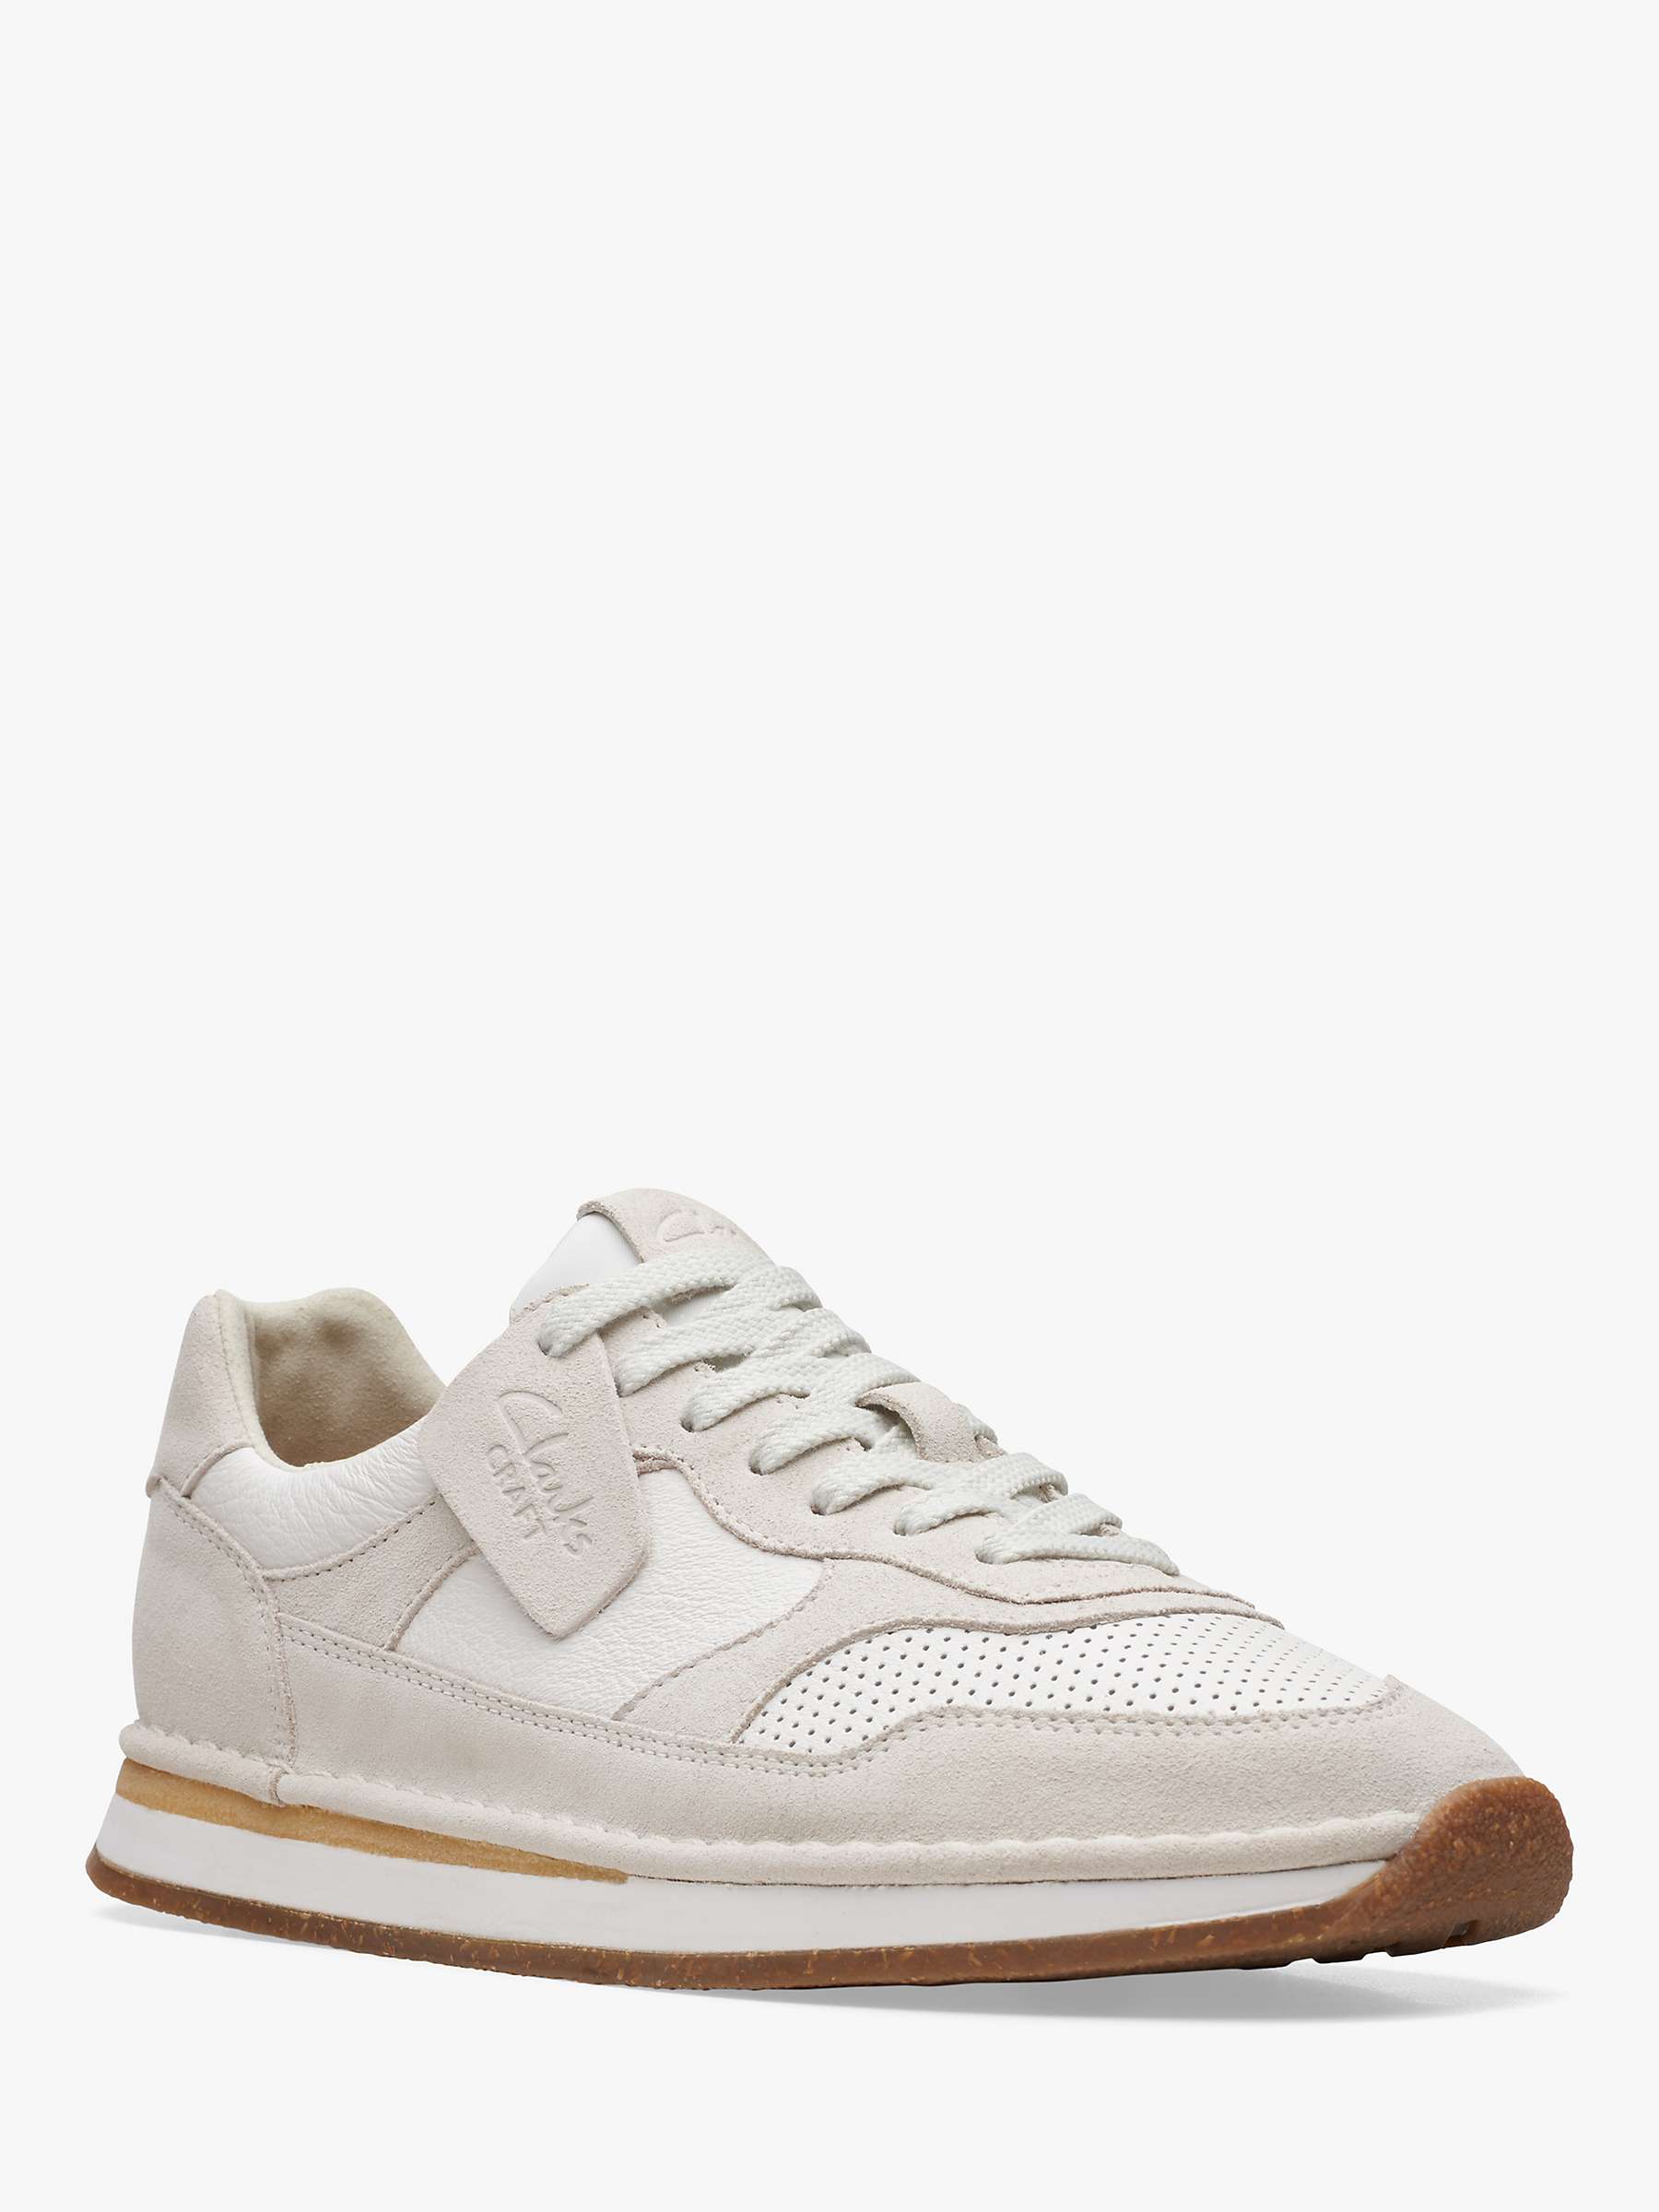 Clarks Craft Run Tor Trainers, White at John Lewis & Partners